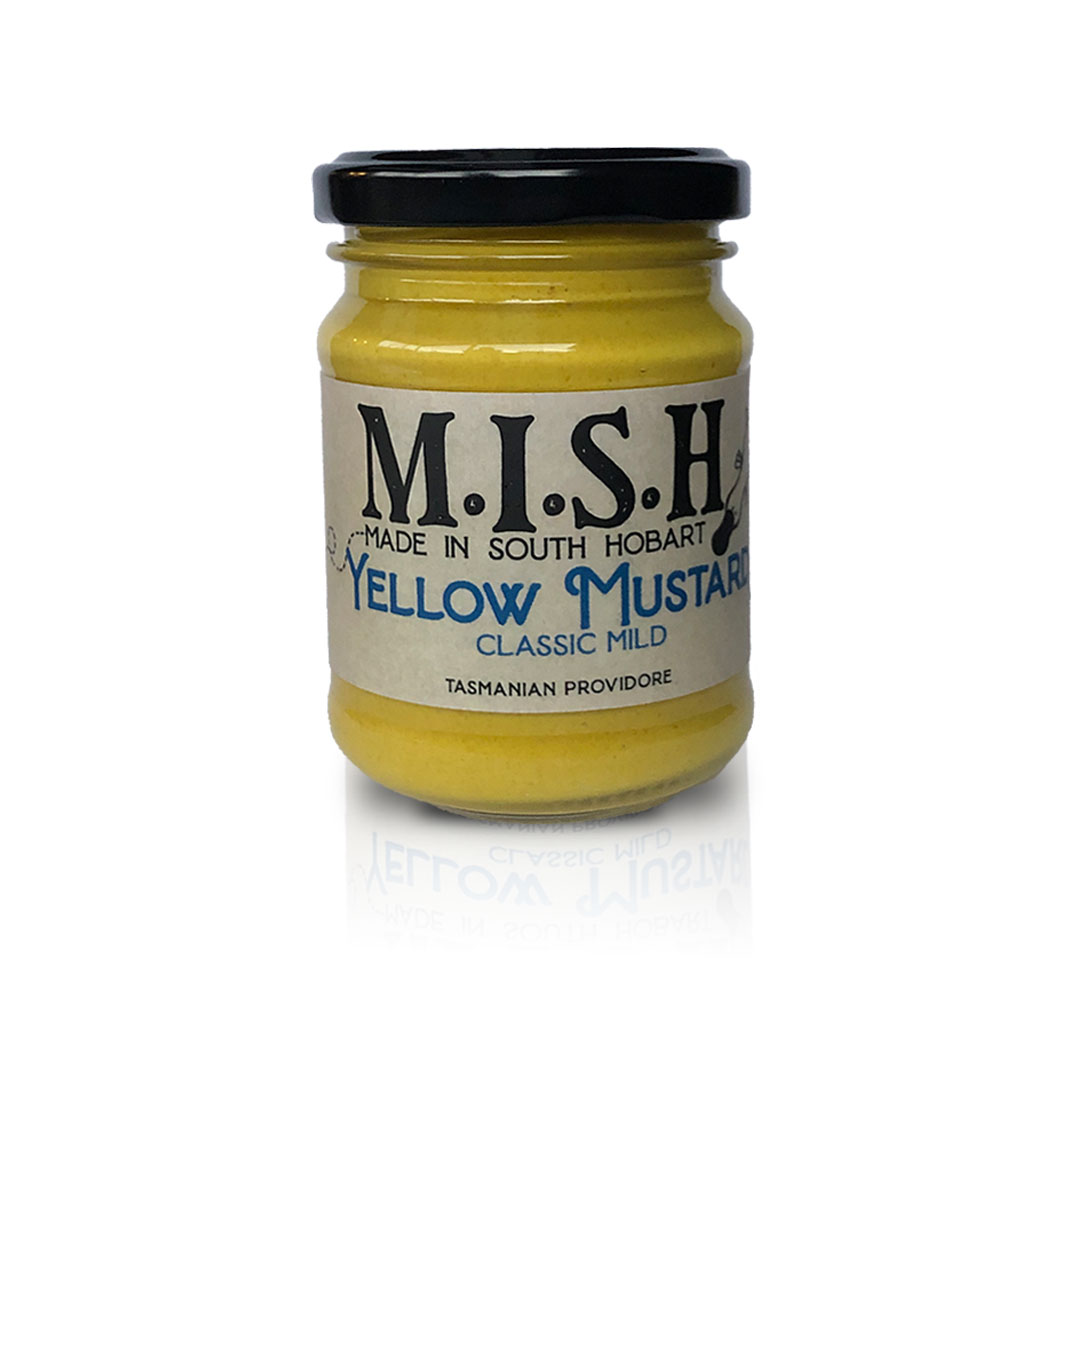 MISH Made in South Hobart yellow mustard